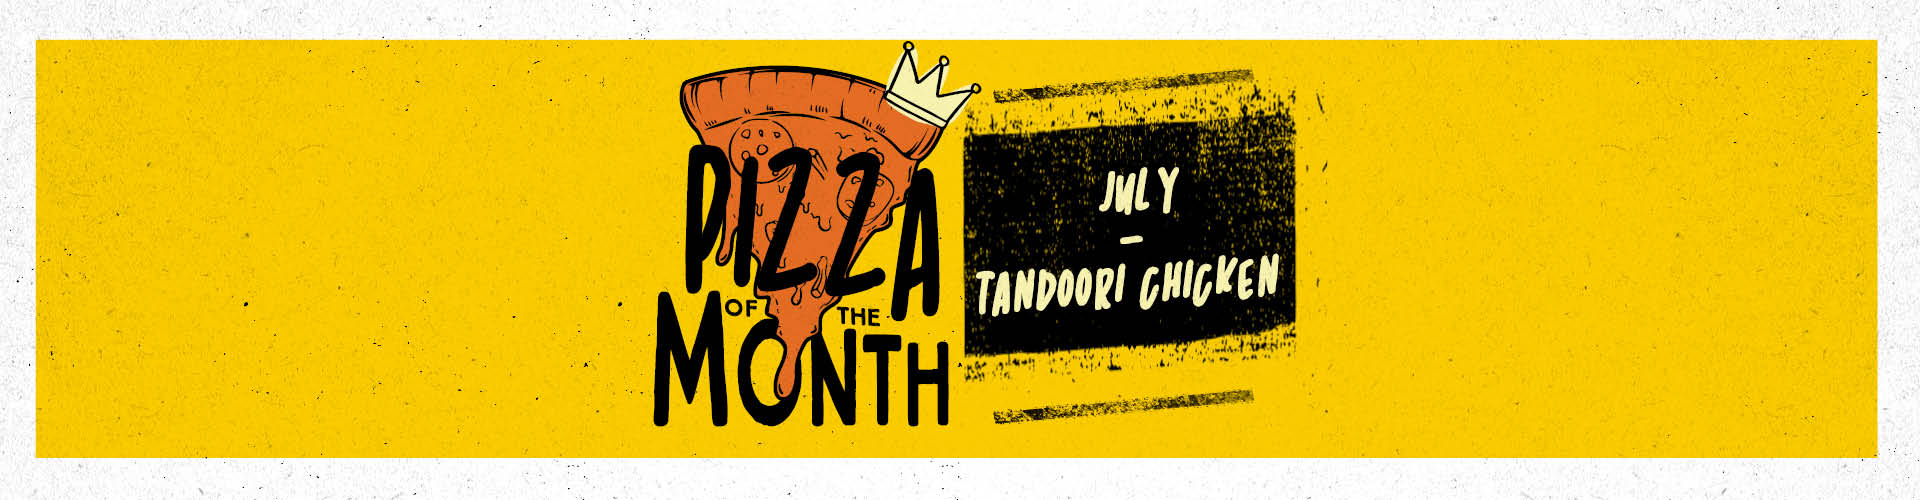 Pizza of the Month - July - Chicken Caesar